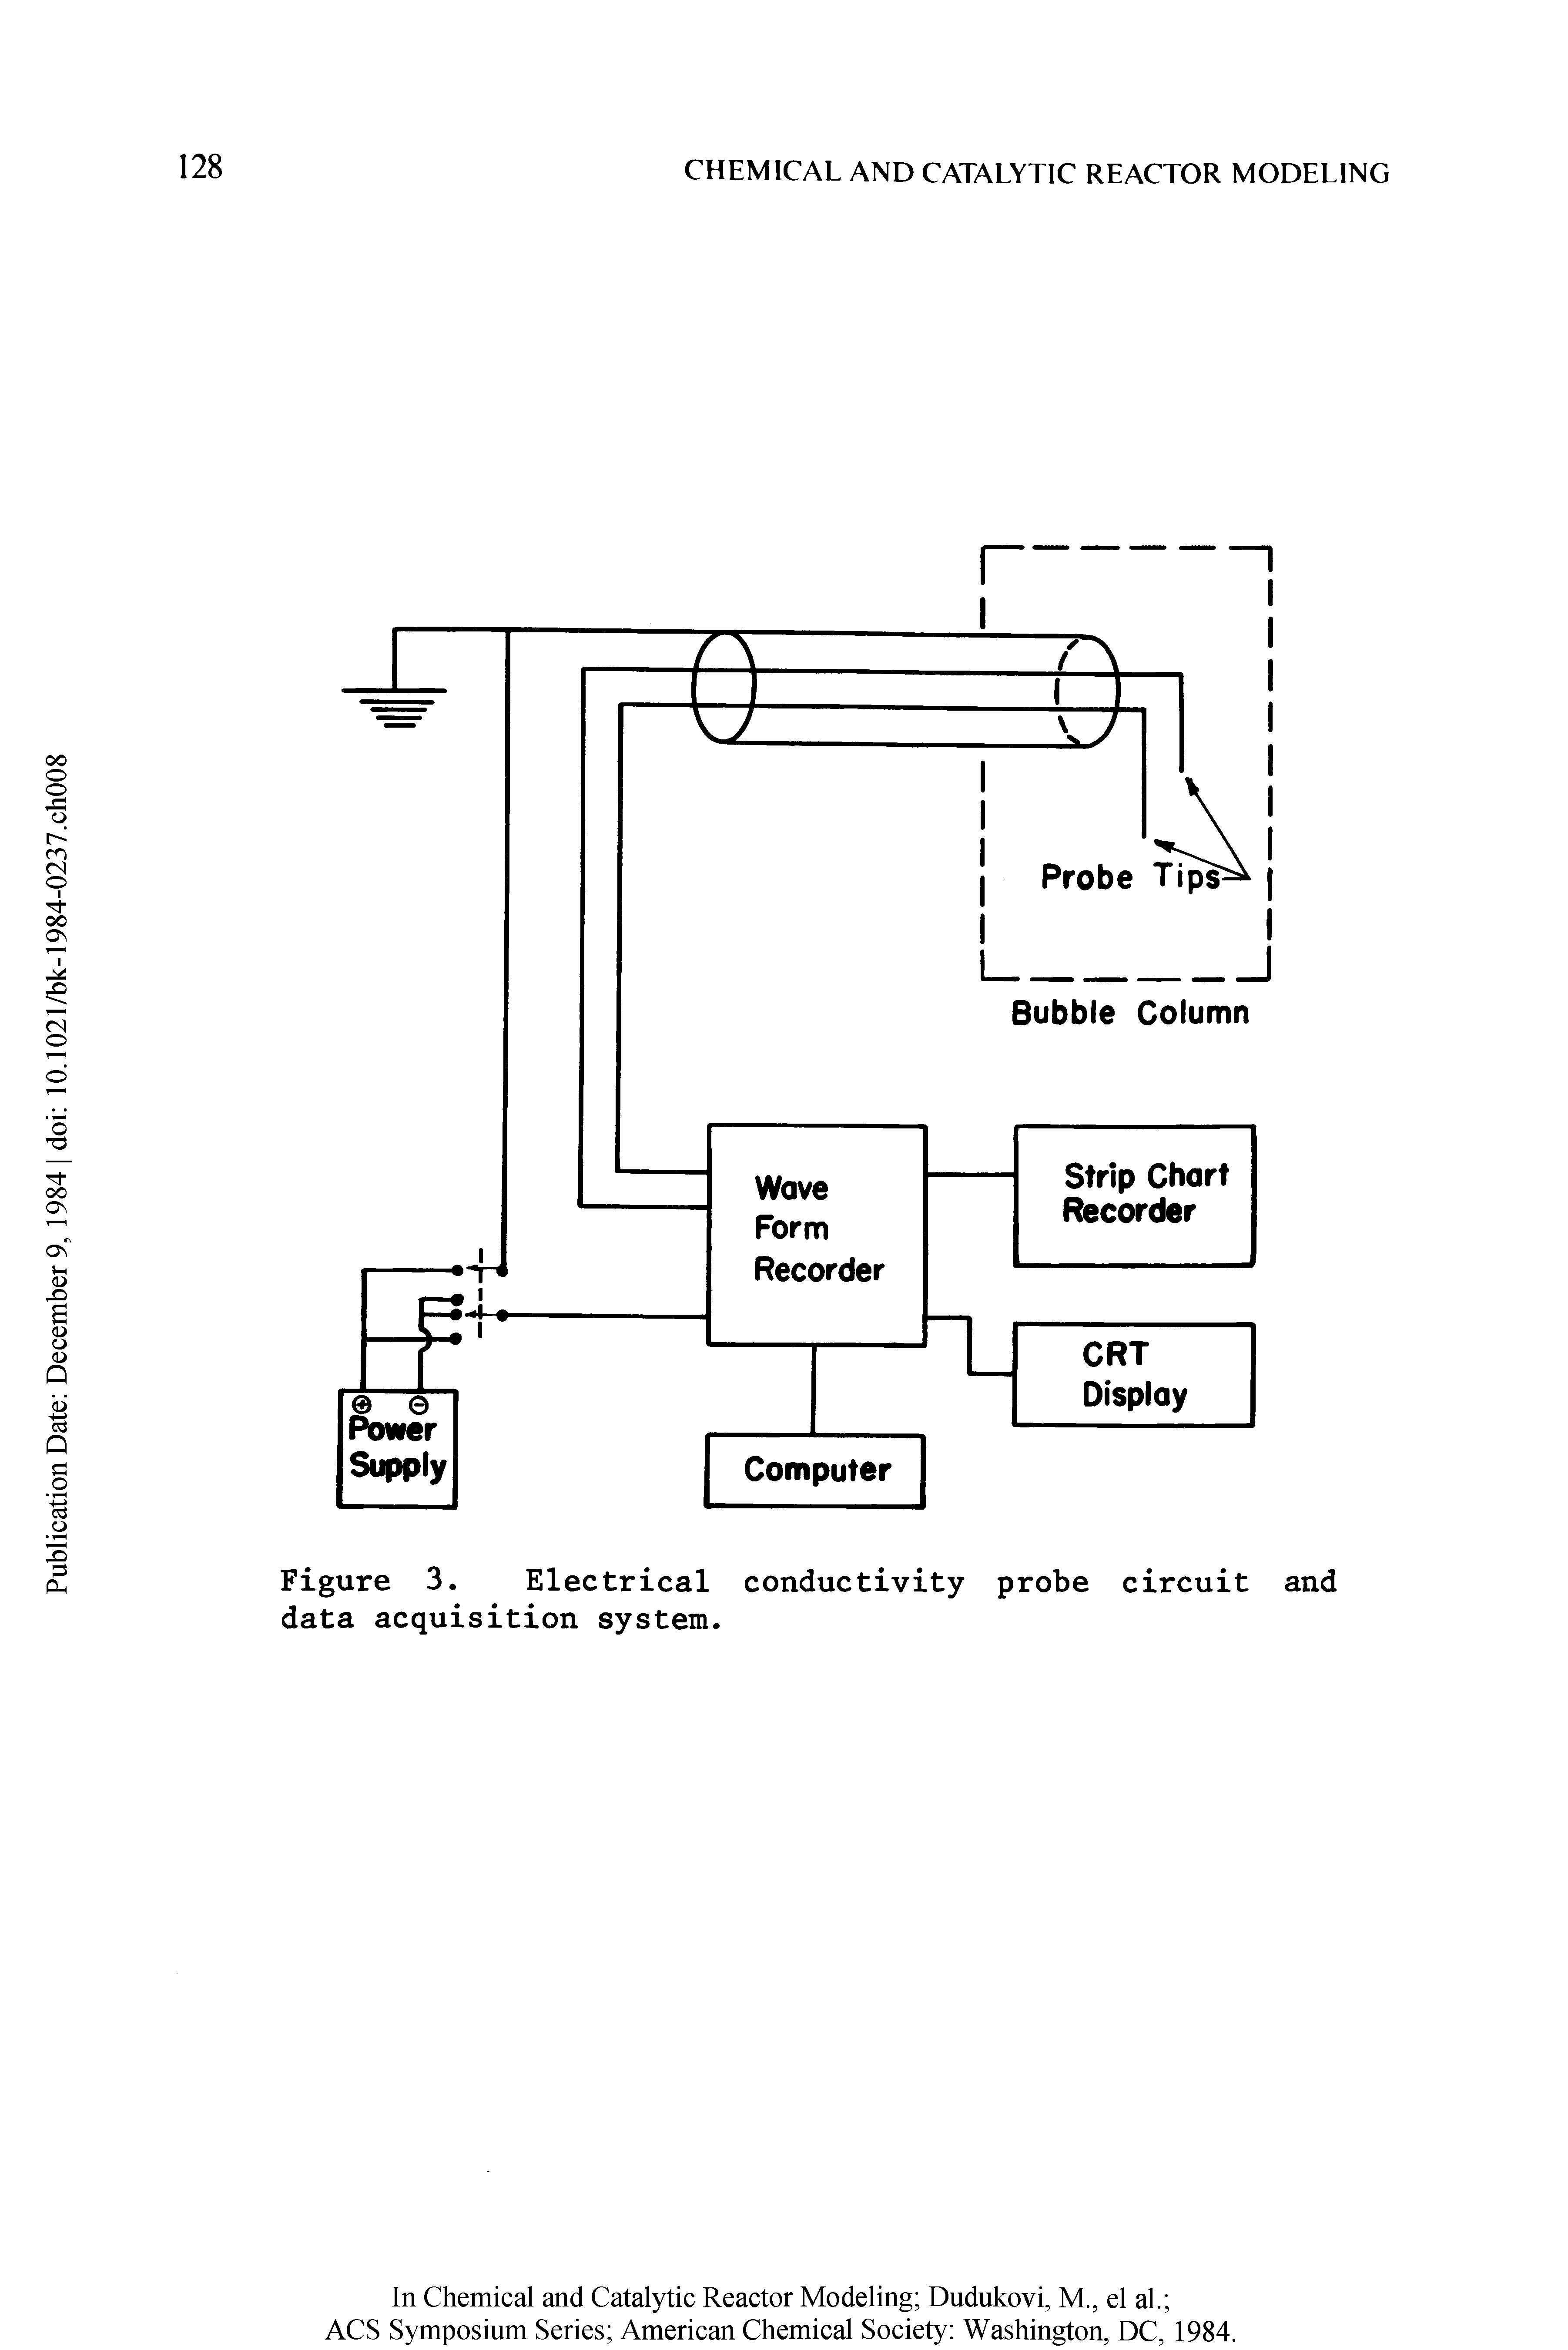 Figure 3. Electrical conductivity probe circuit and data acquisition system.